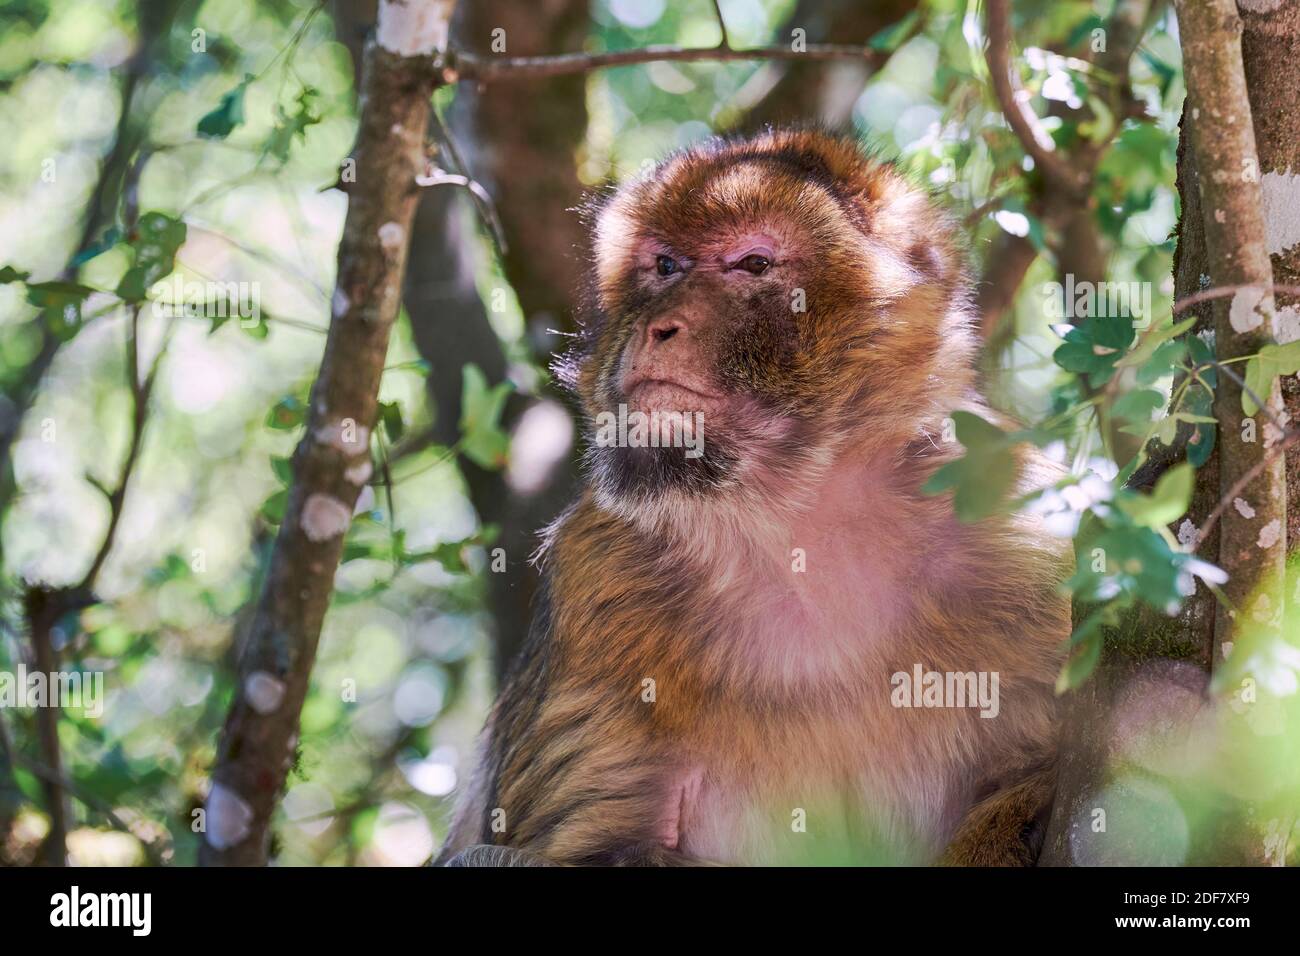 France, Lot, Rocamadour, Foret des Singes, Barbary Macaque also called Barbary ape or Magot (Macaca sylvanus), native from Morocco, portrait Stock Photo